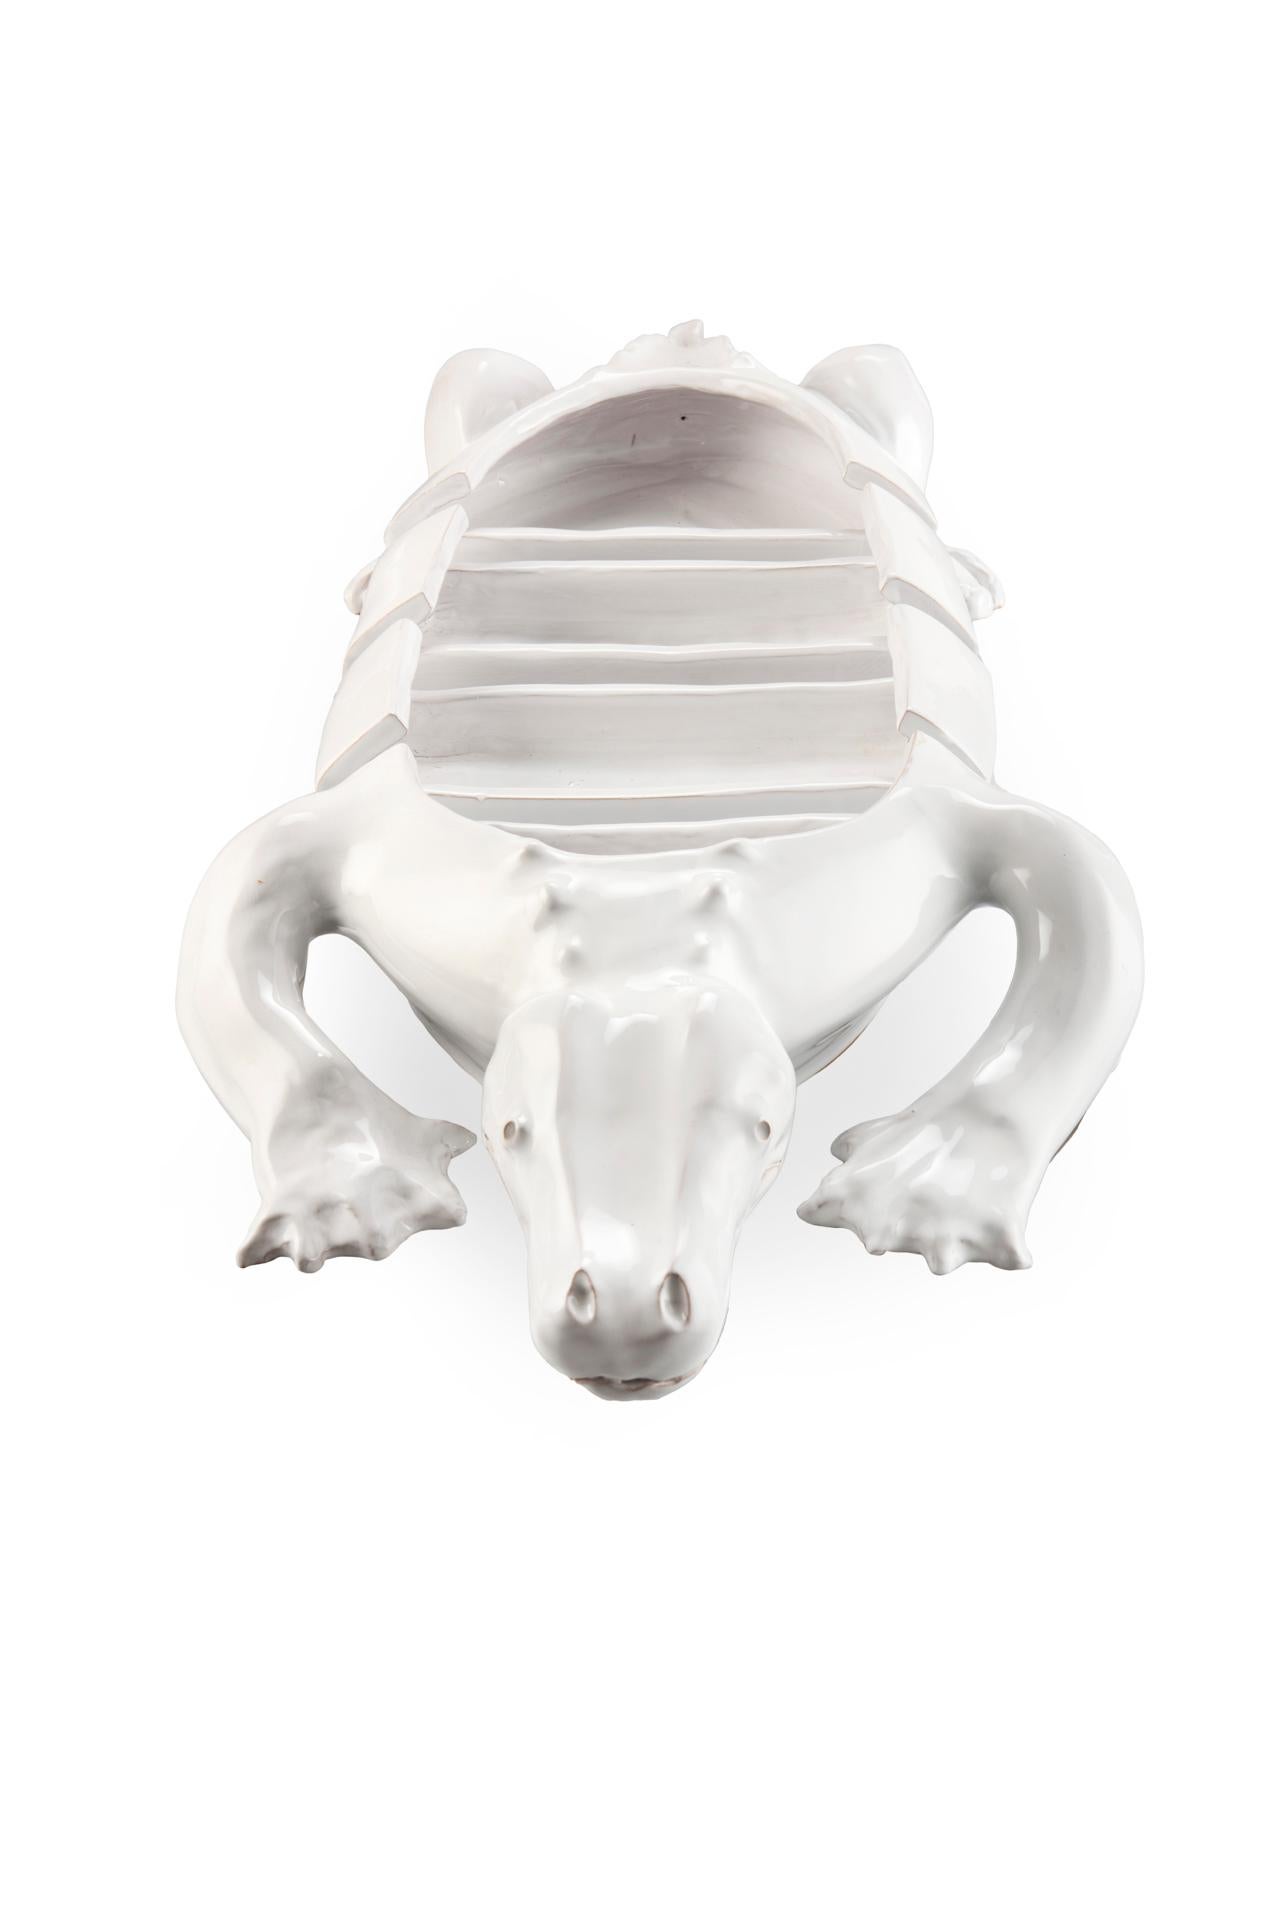 Other Freaklab Crocodile 4part Bowl Made Entirely Byhand in Ceramic in White and Green For Sale